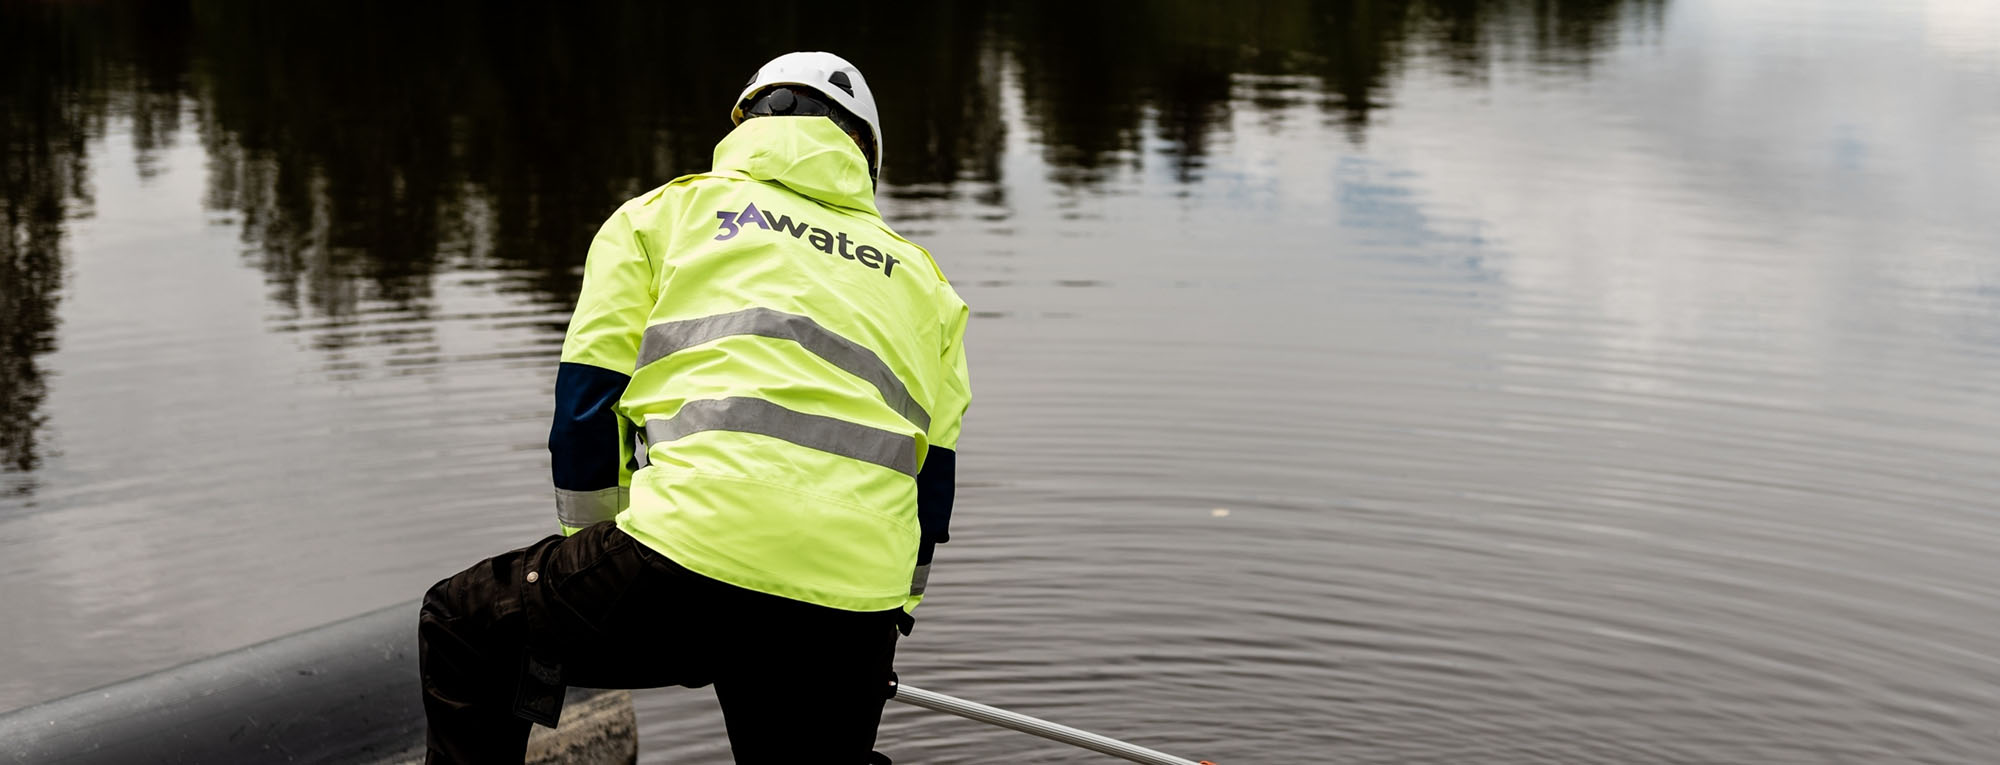 A person wearing a 3AWater branded safety jacket taking a water sample from a pond.